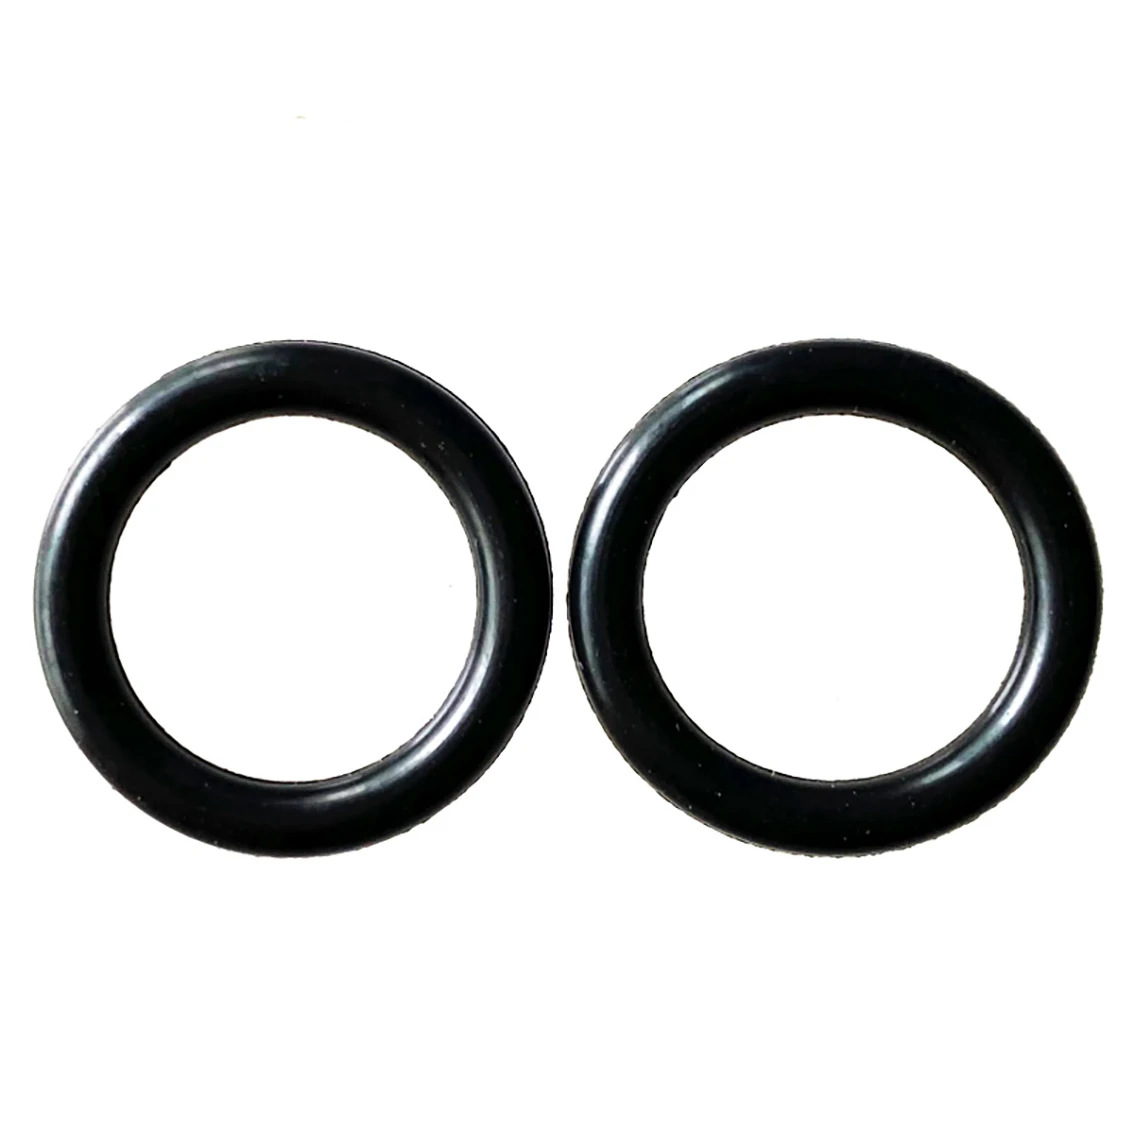 

1Pcs Black NBR Rubber O Ring 8.6mm Wire Diameter O Rings Gaskets OD 50-295mm O-Ring Oil Seals Washer